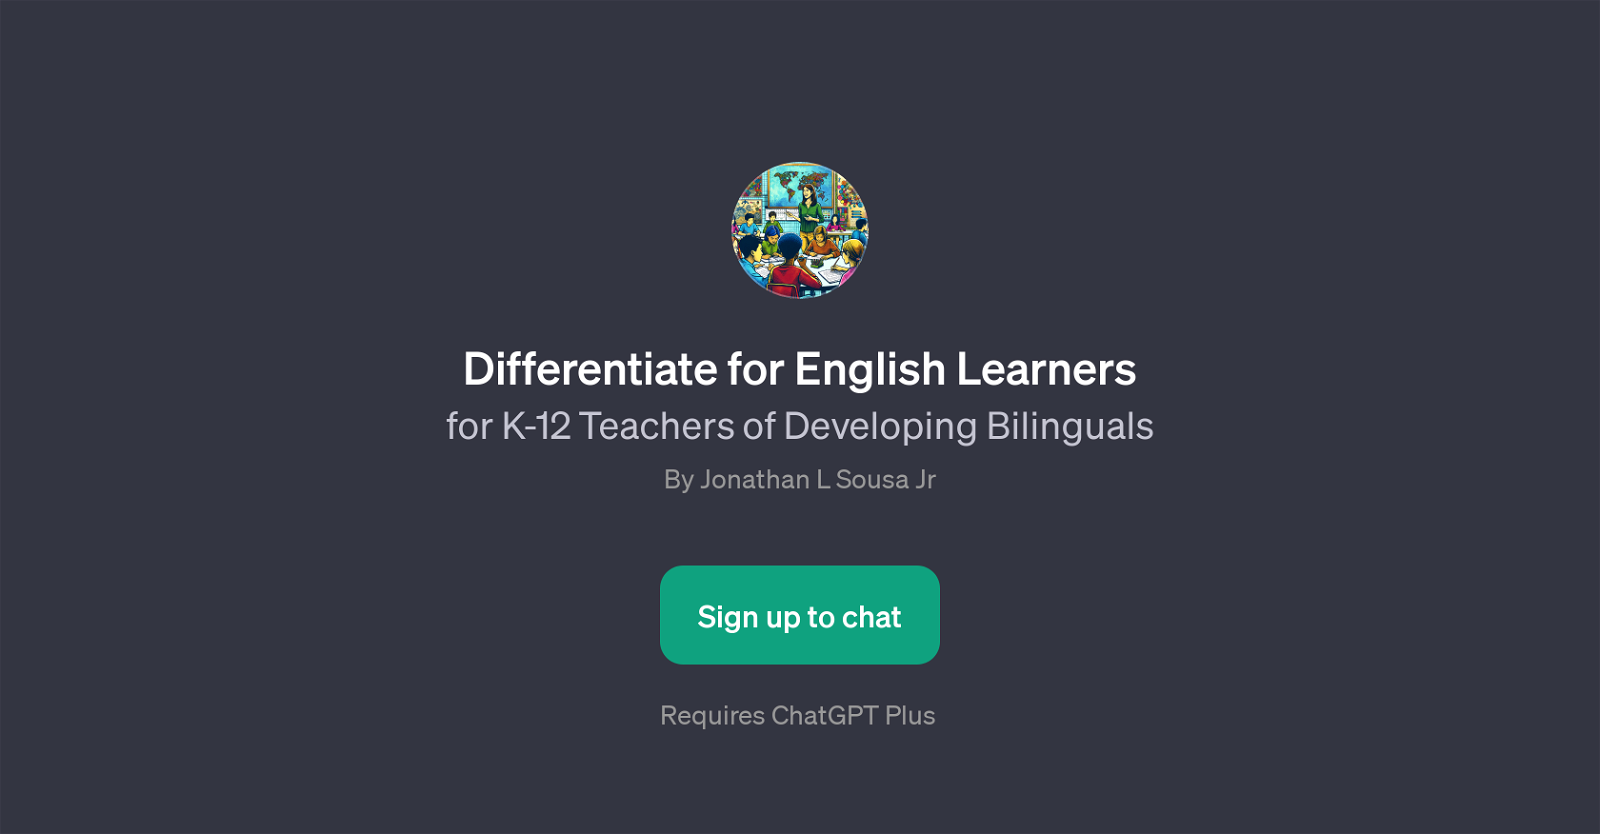 Differentiate for English Learners website